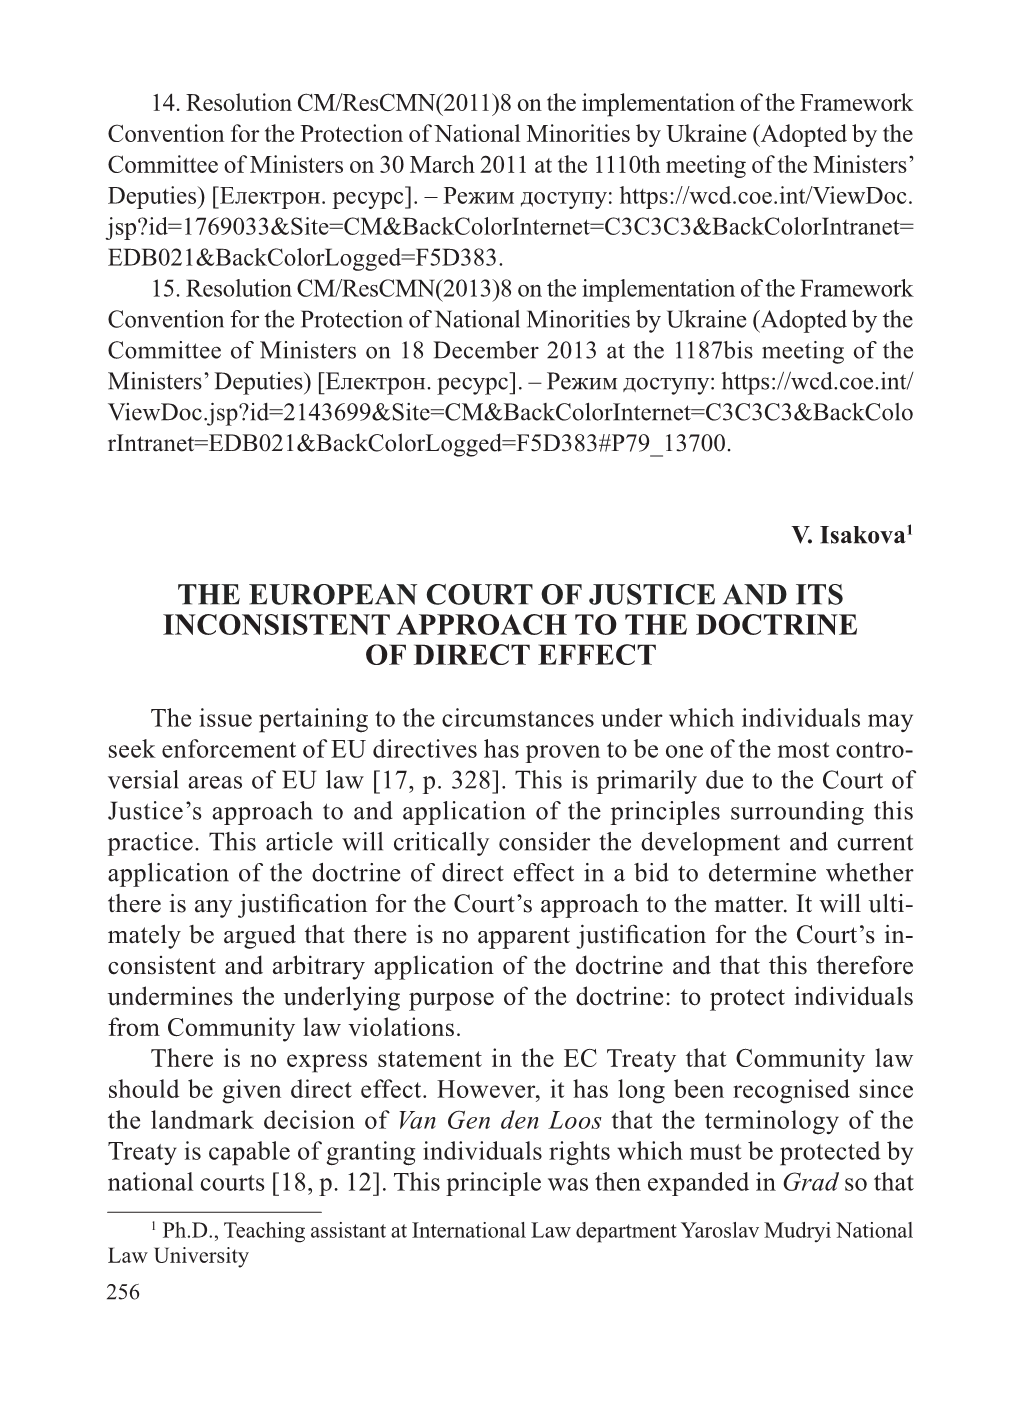 The European Court of Justice and Its Inconsistent Approach to the Doctrine of Direct Effect